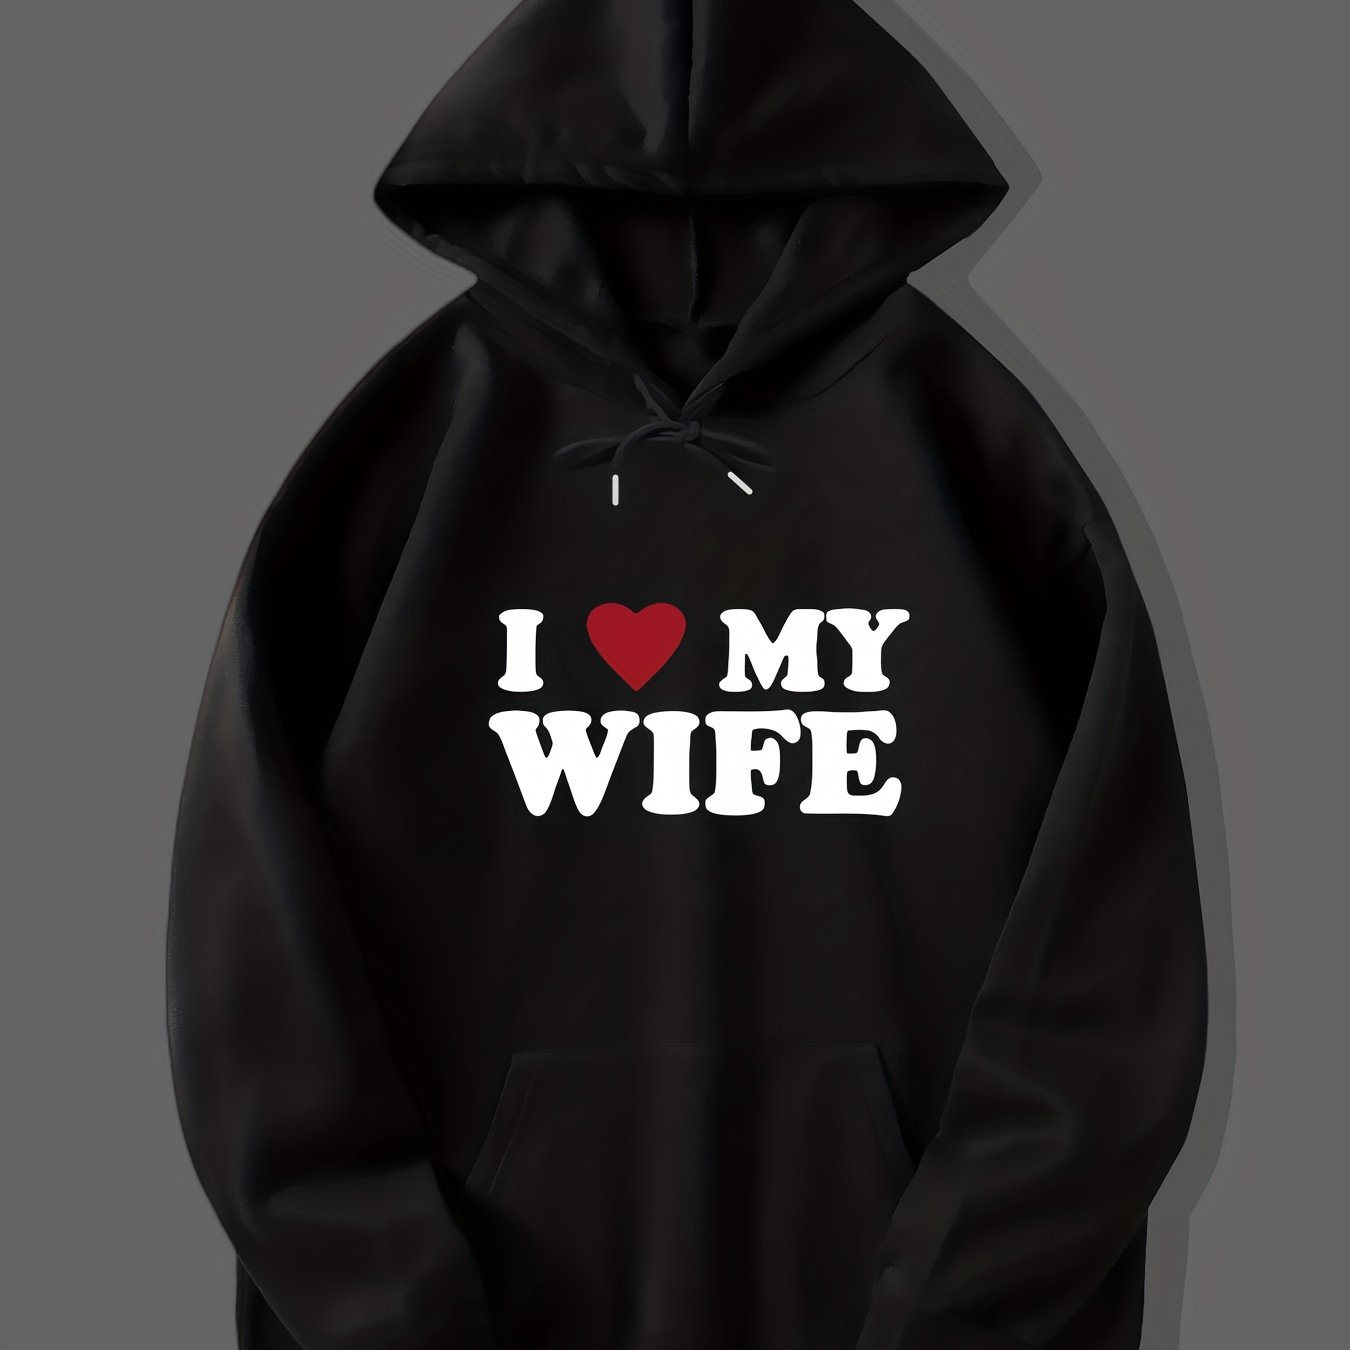 I Love My Wife Print Hoodie, Cool Hoodies For Men, Men's Casual Graphic Design Pullover Hooded Sweatshirt With Kangaroo Pocket Streetwear For Winter Fall, As Gifts For Boyfriend Husband